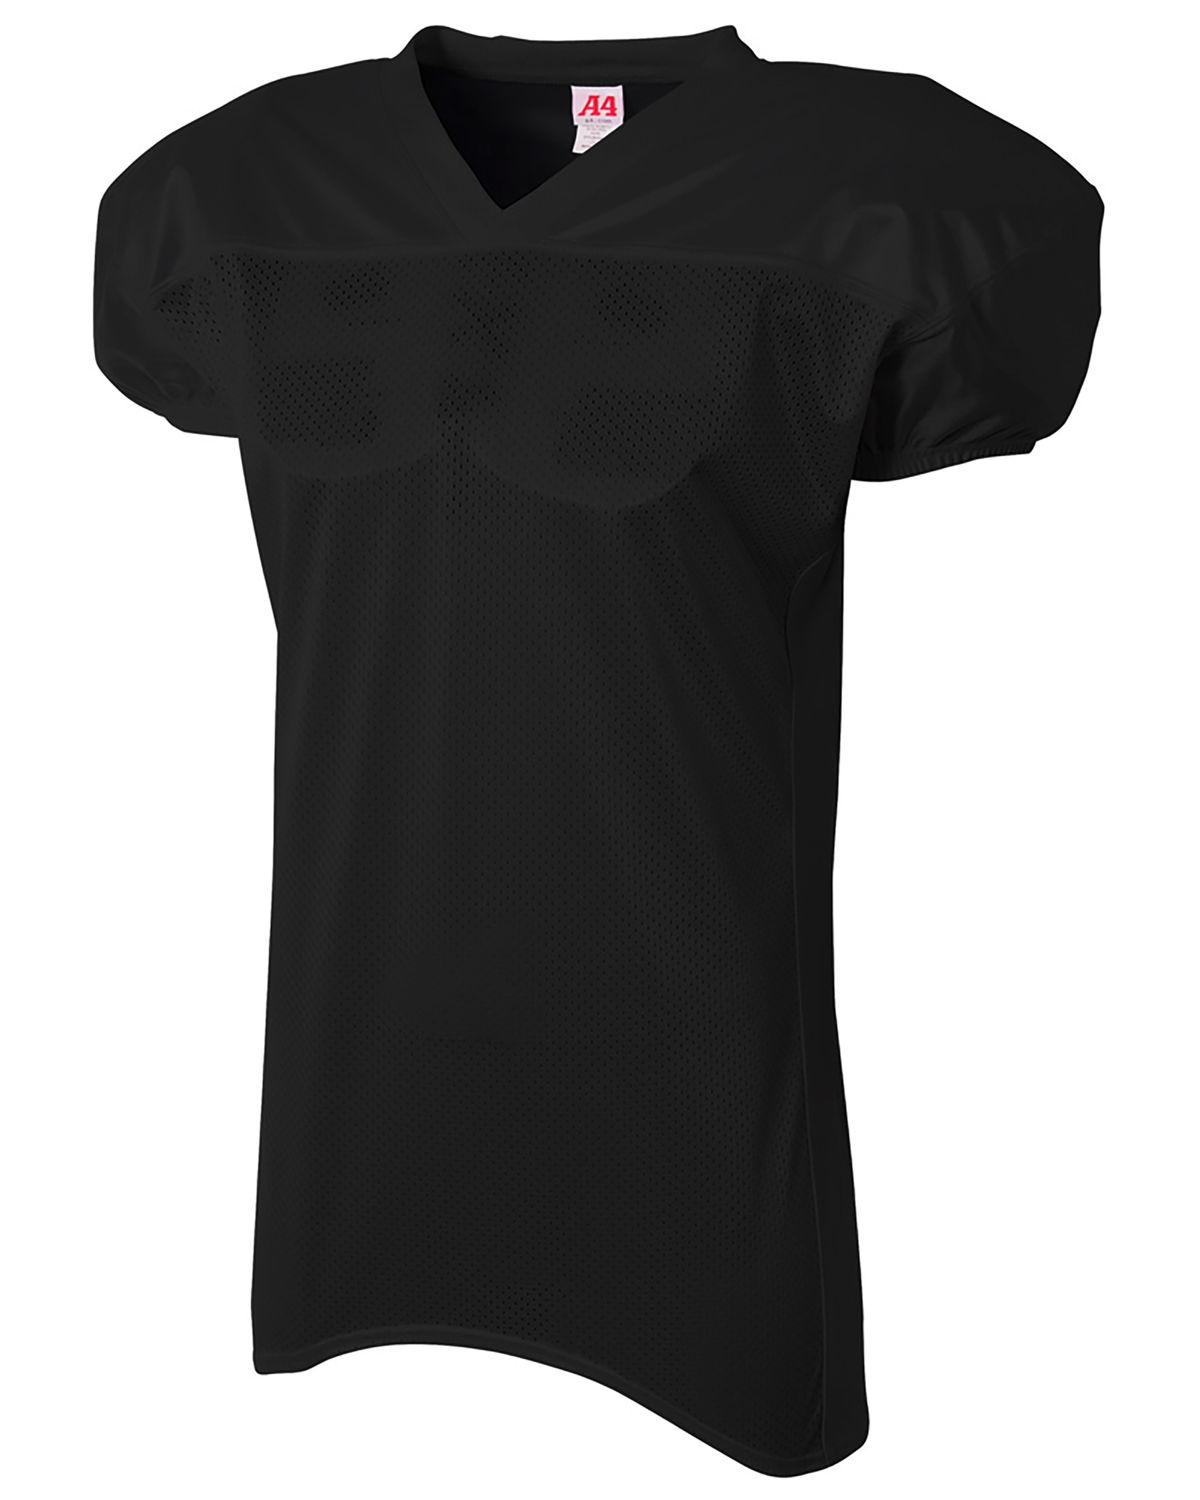 'A4 NB4242 Youth Nickleback Football Jersey W/Double Dazzle Cowl And Skill Sleeve'